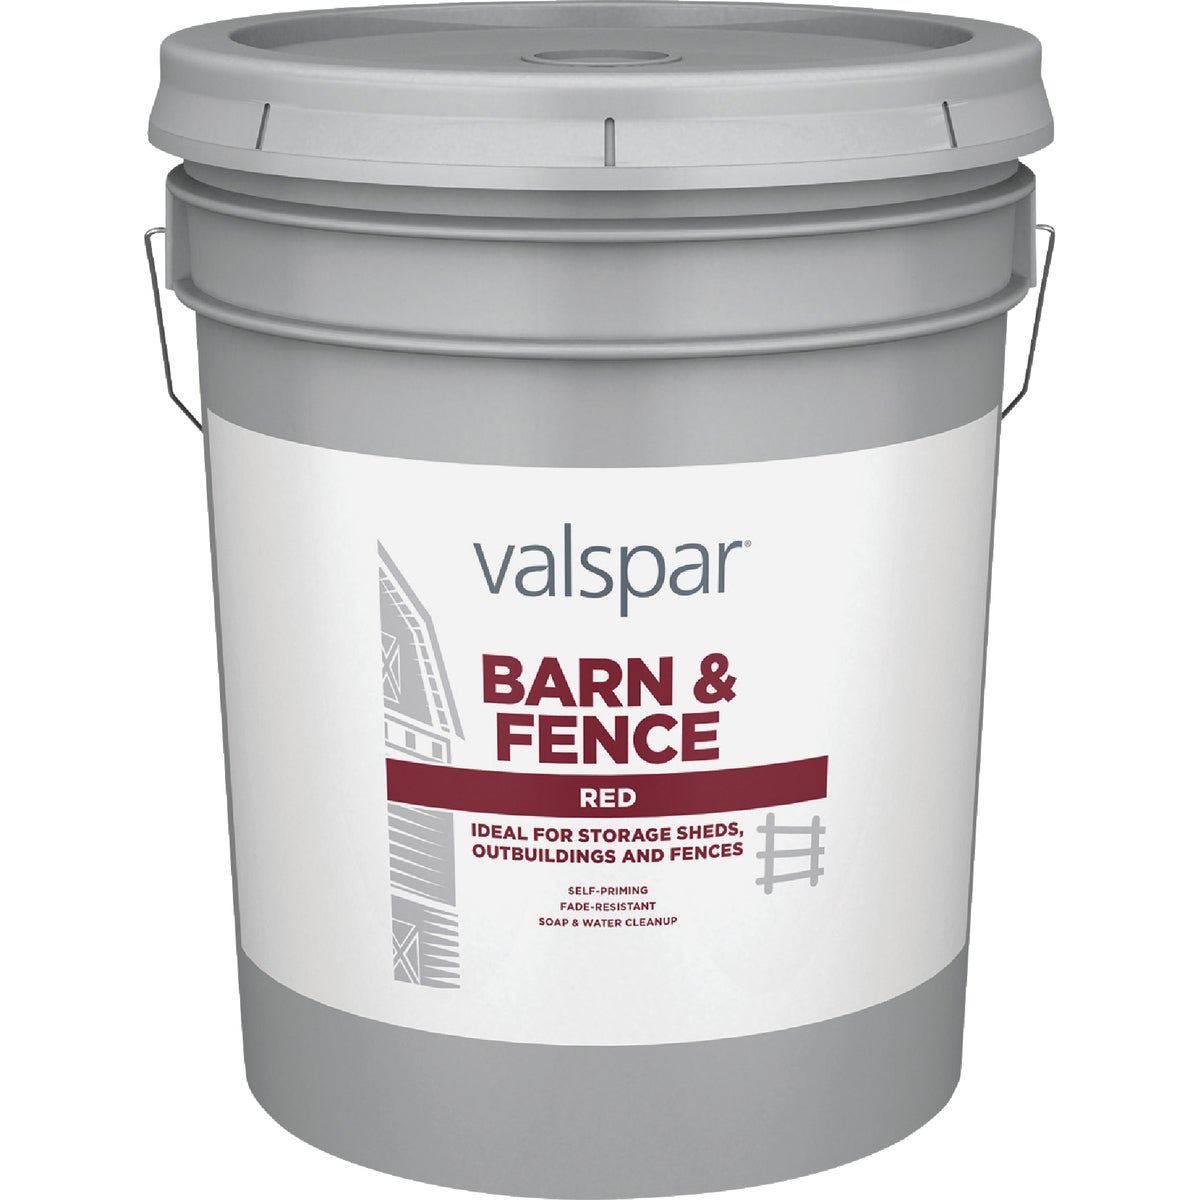 Valspar Latex Paint & Primer In One Flat Barn & Fence Paint, Red, 5 Gal.